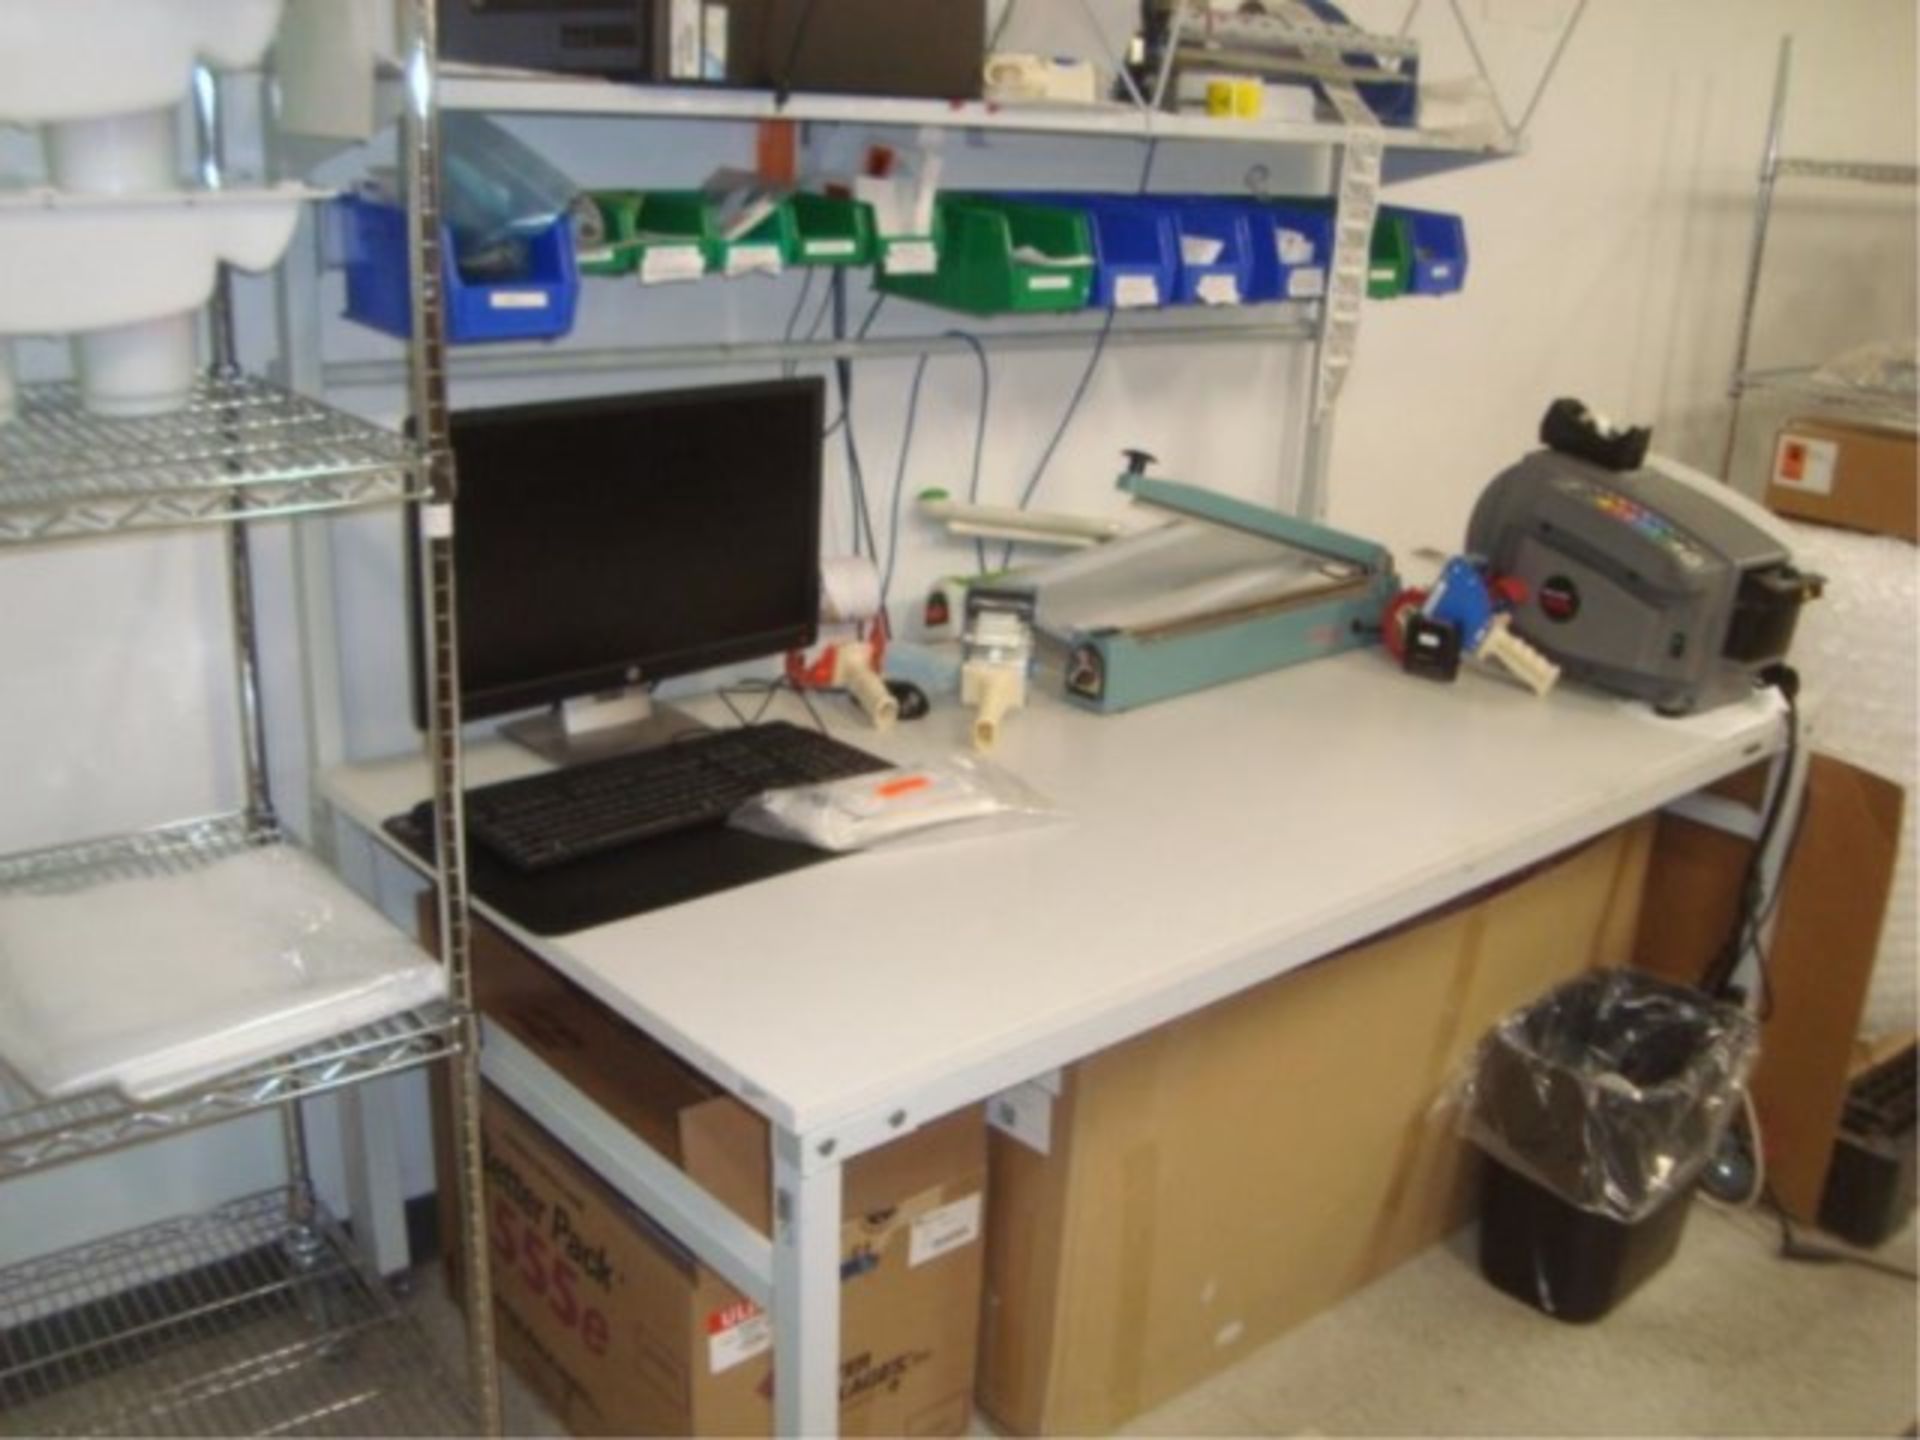 Technicians Workstation Benches - Image 4 of 8